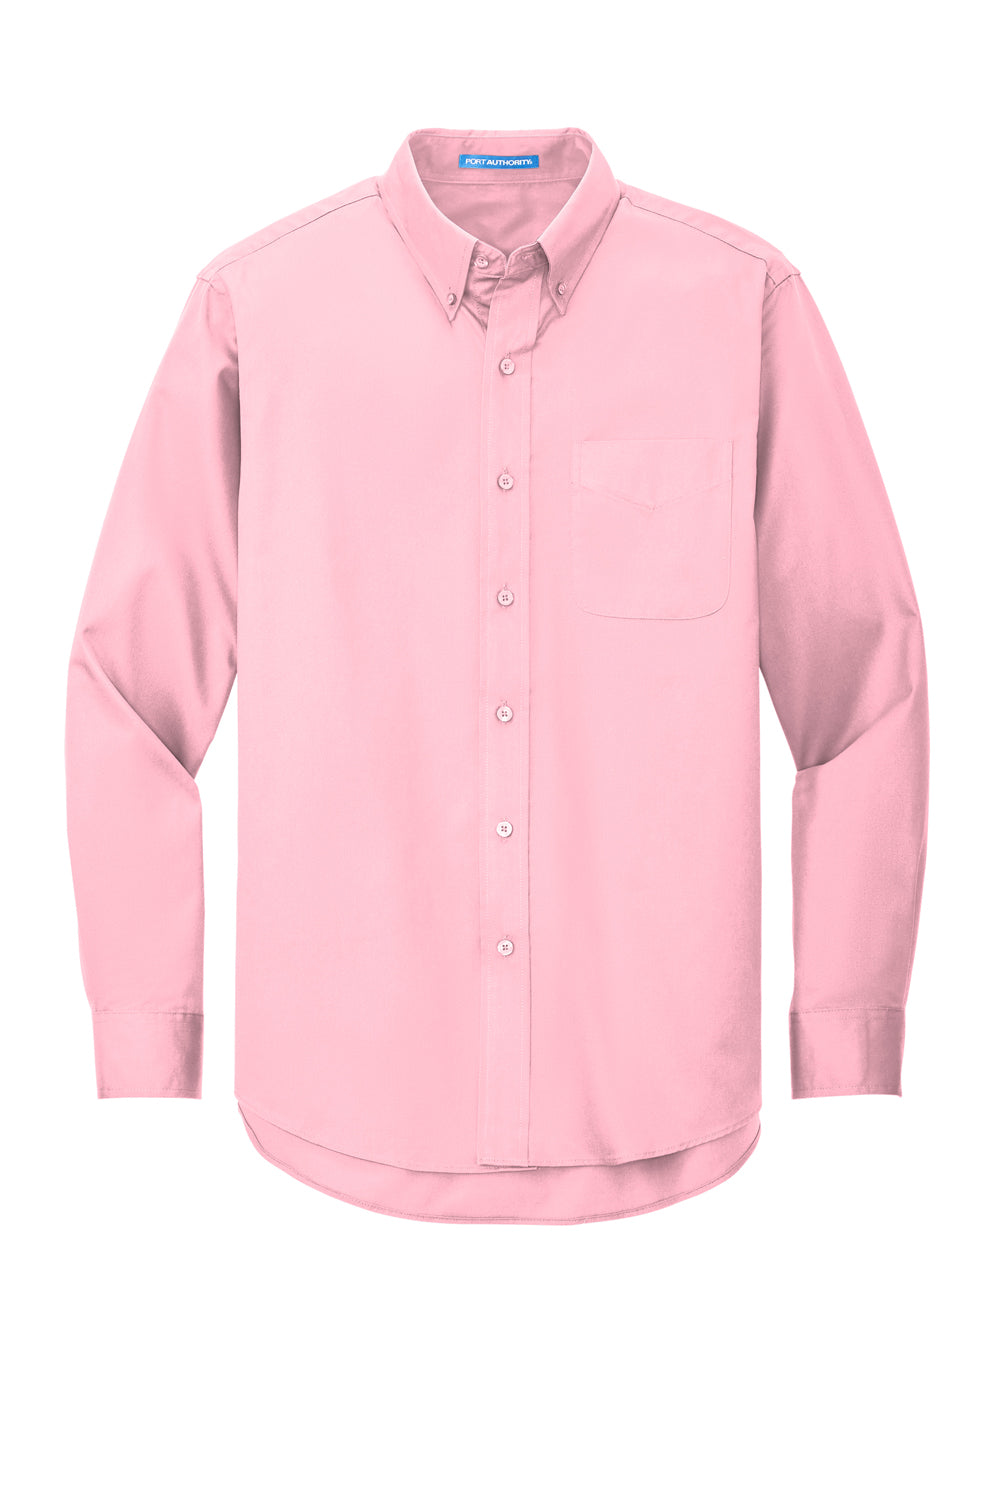 Port Authority S608/TLS608/S608ES Mens Easy Care Wrinkle Resistant Long Sleeve Button Down Shirt w/ Pocket Light Pink Flat Front